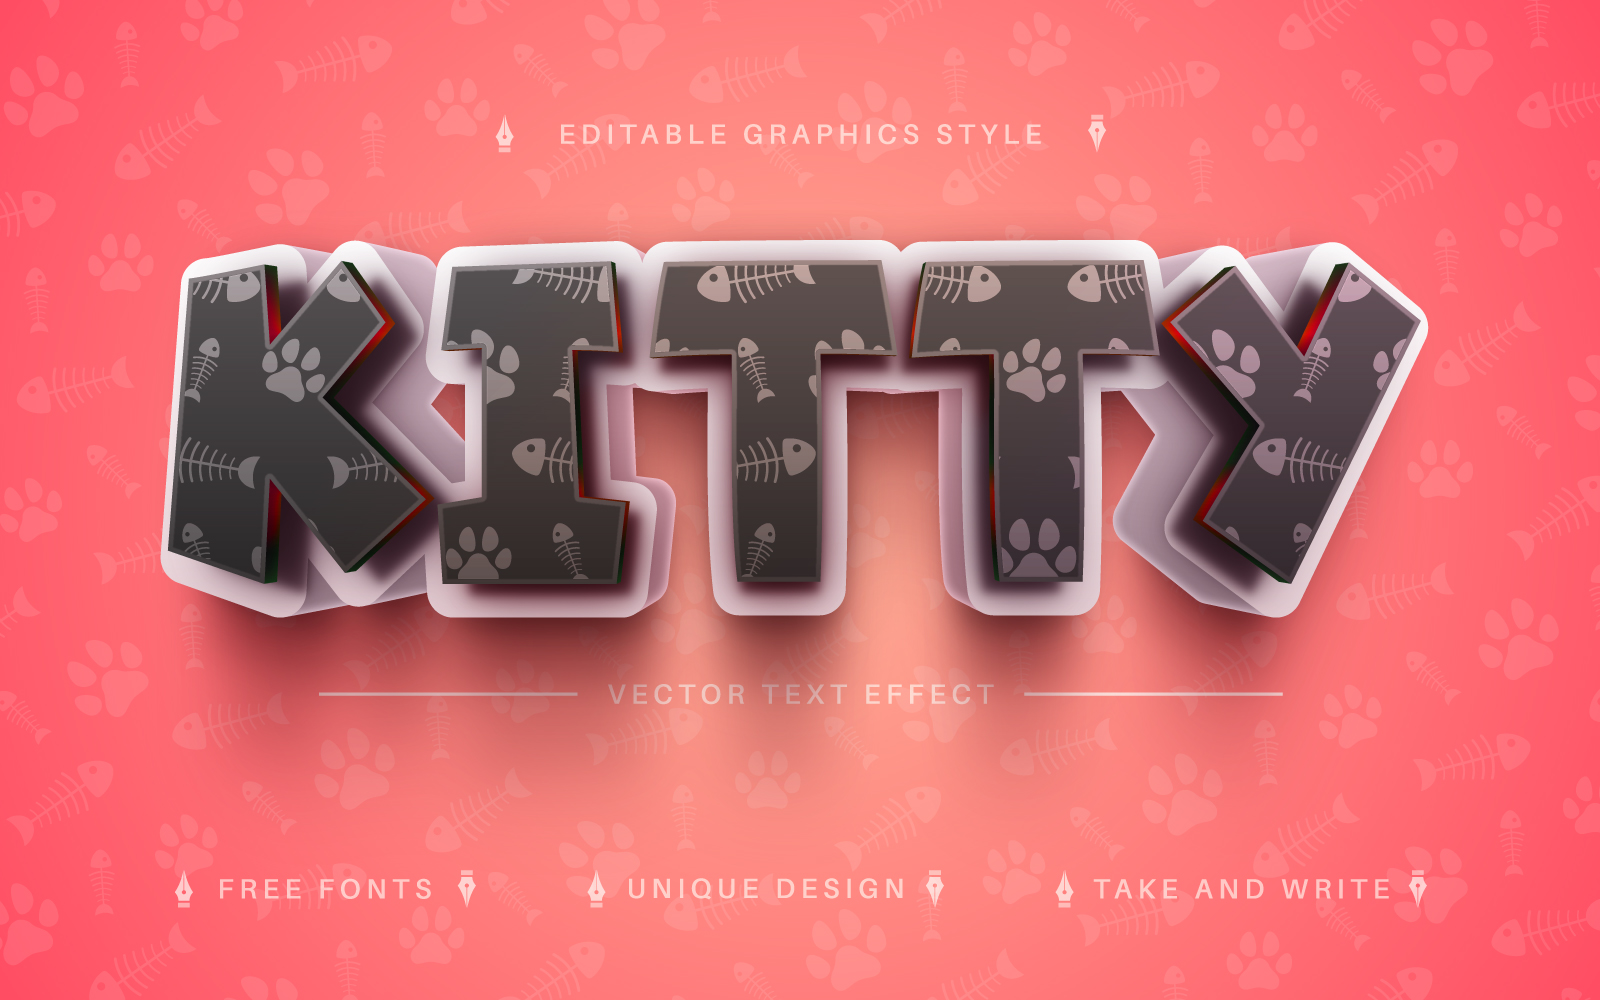 Kitty - Editable Text Effect, Font Style, Graphics Illustration